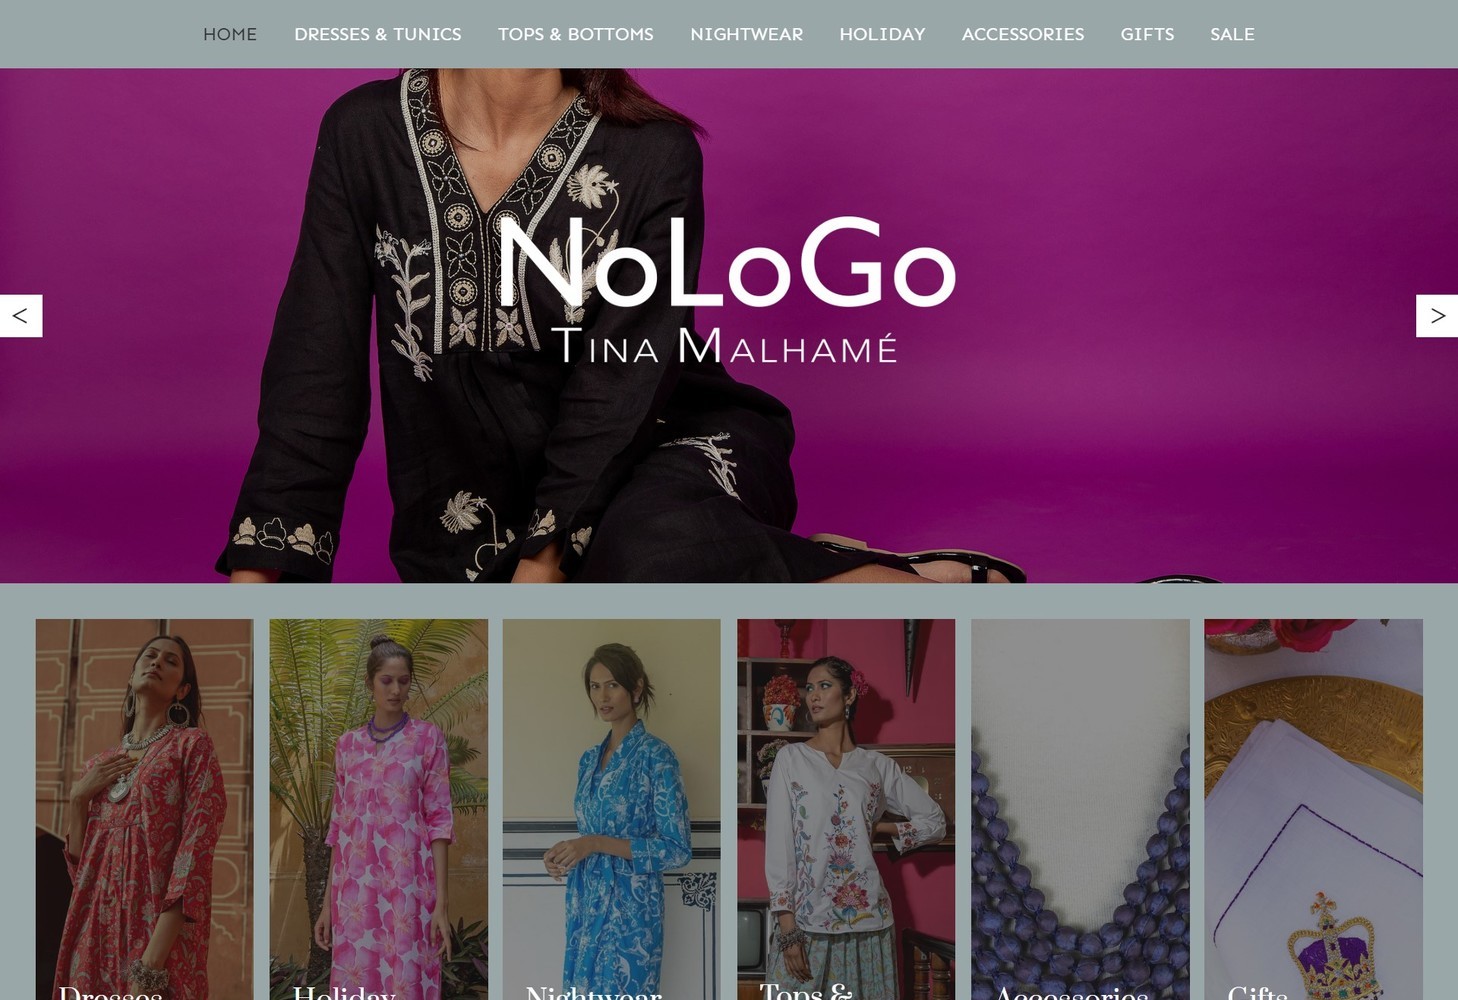 A responsive web design for a clothing company shown on a desktop computer.